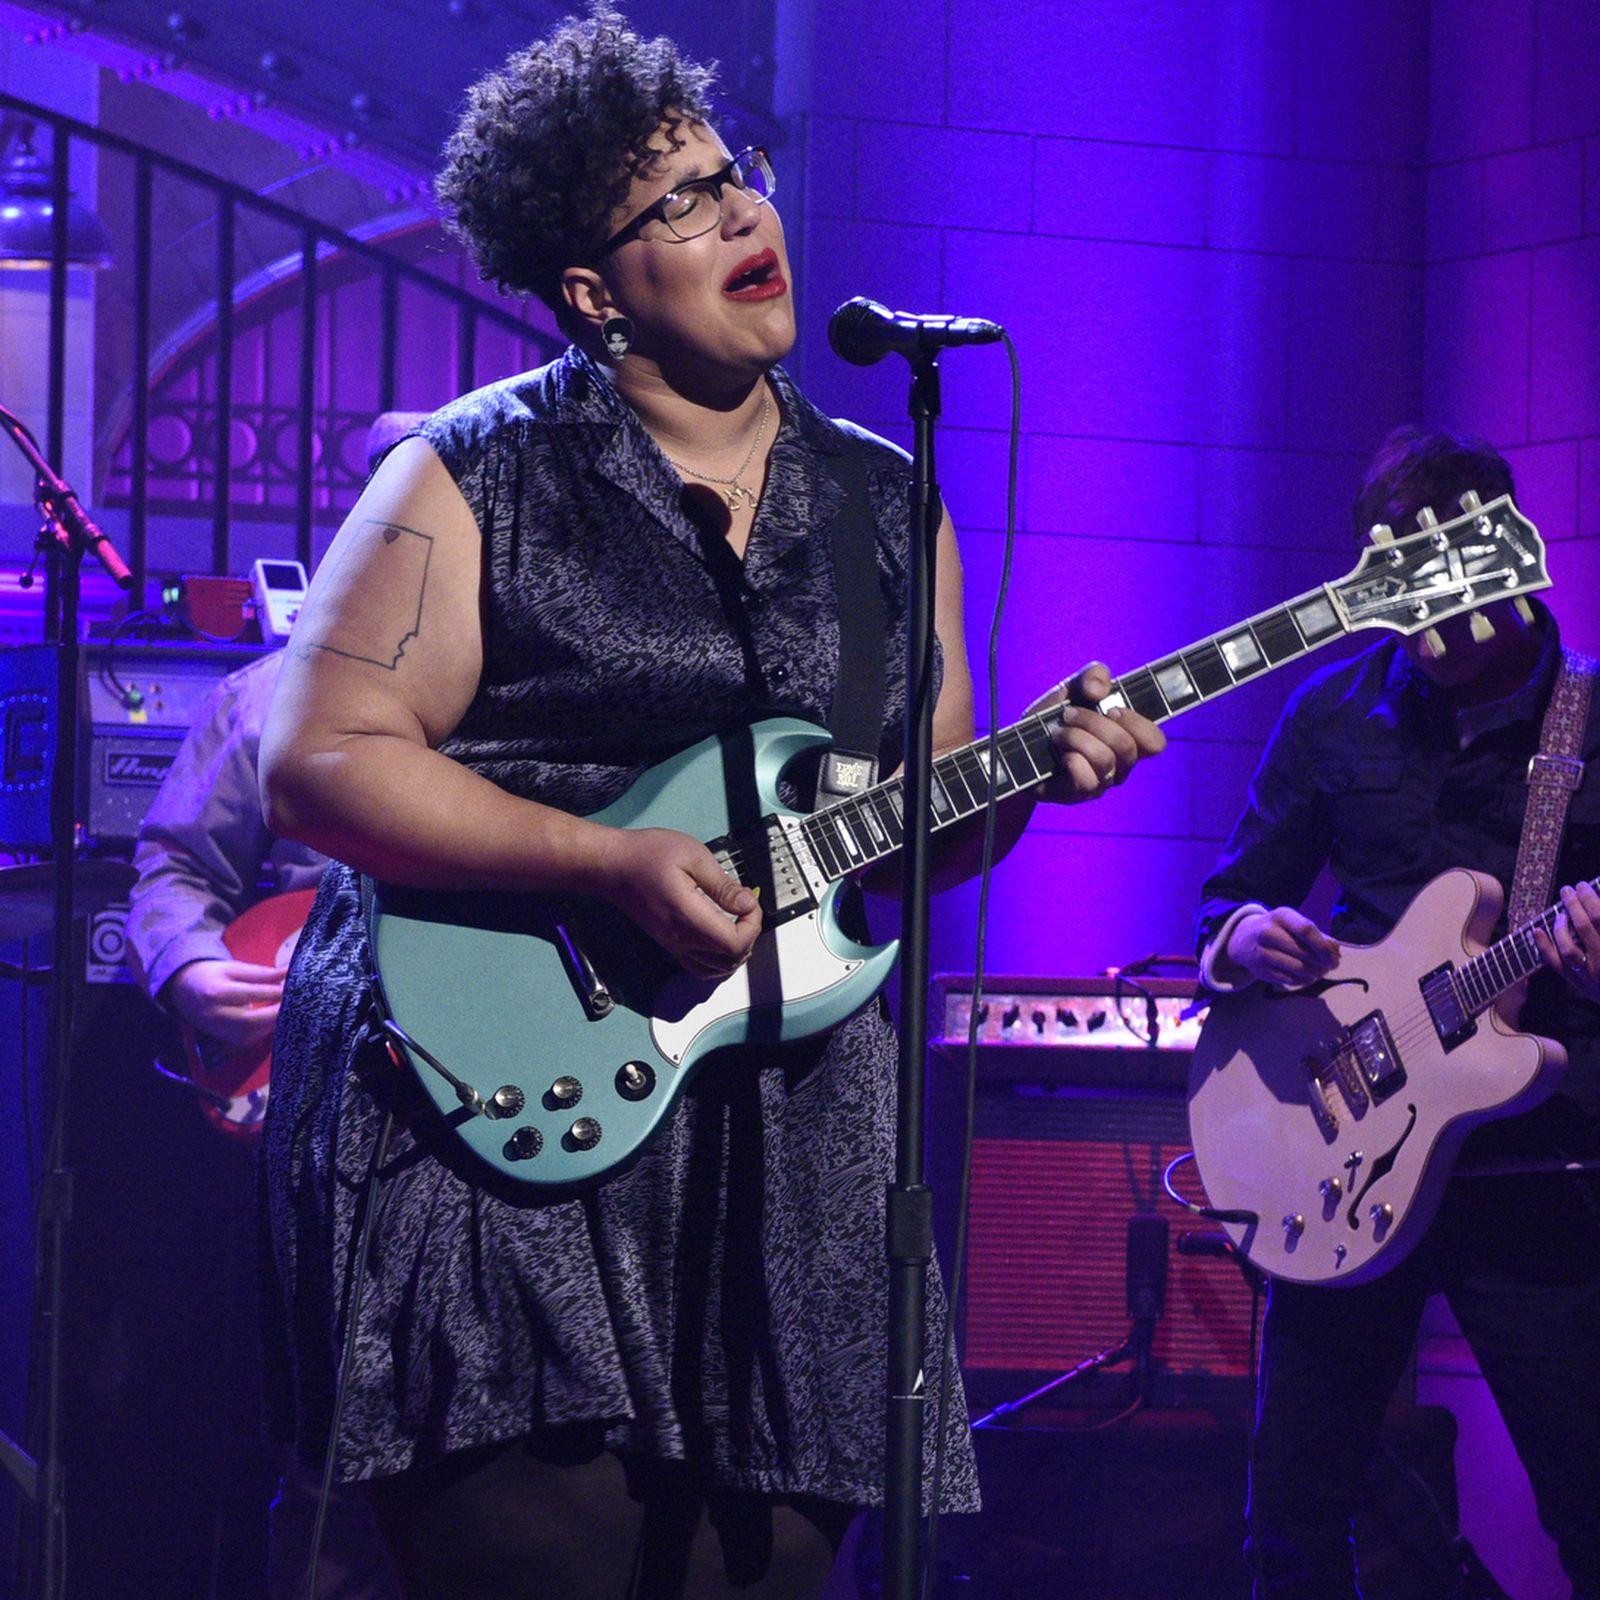 Alabama Shakes' Performances on SNL This Weekend Were Absolute Fire